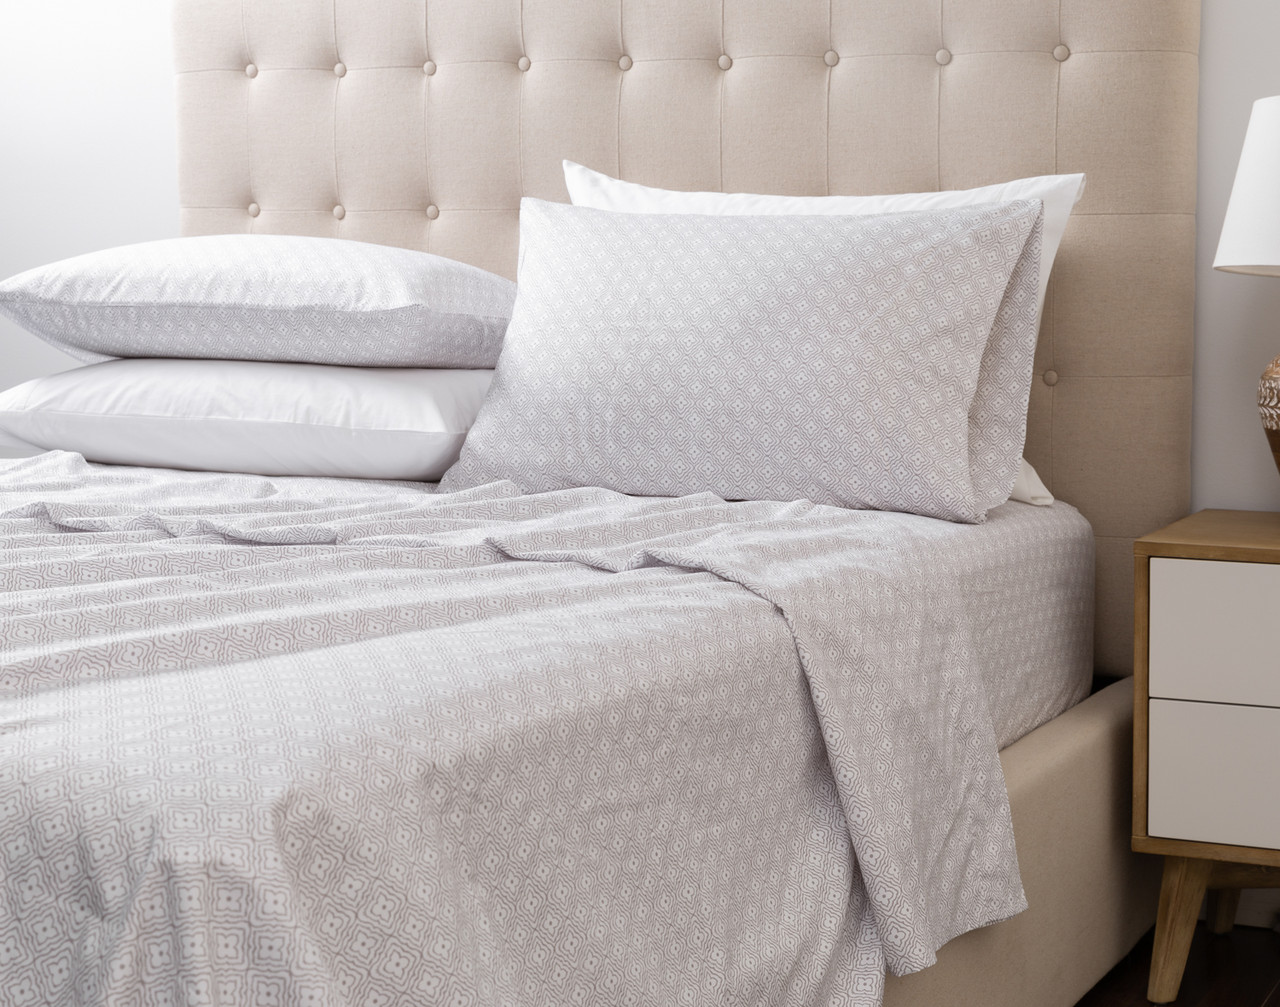 Our Recycled Microfiber Sheet Set in Chester dressed over an undecorated bed in a neutral bedroom.